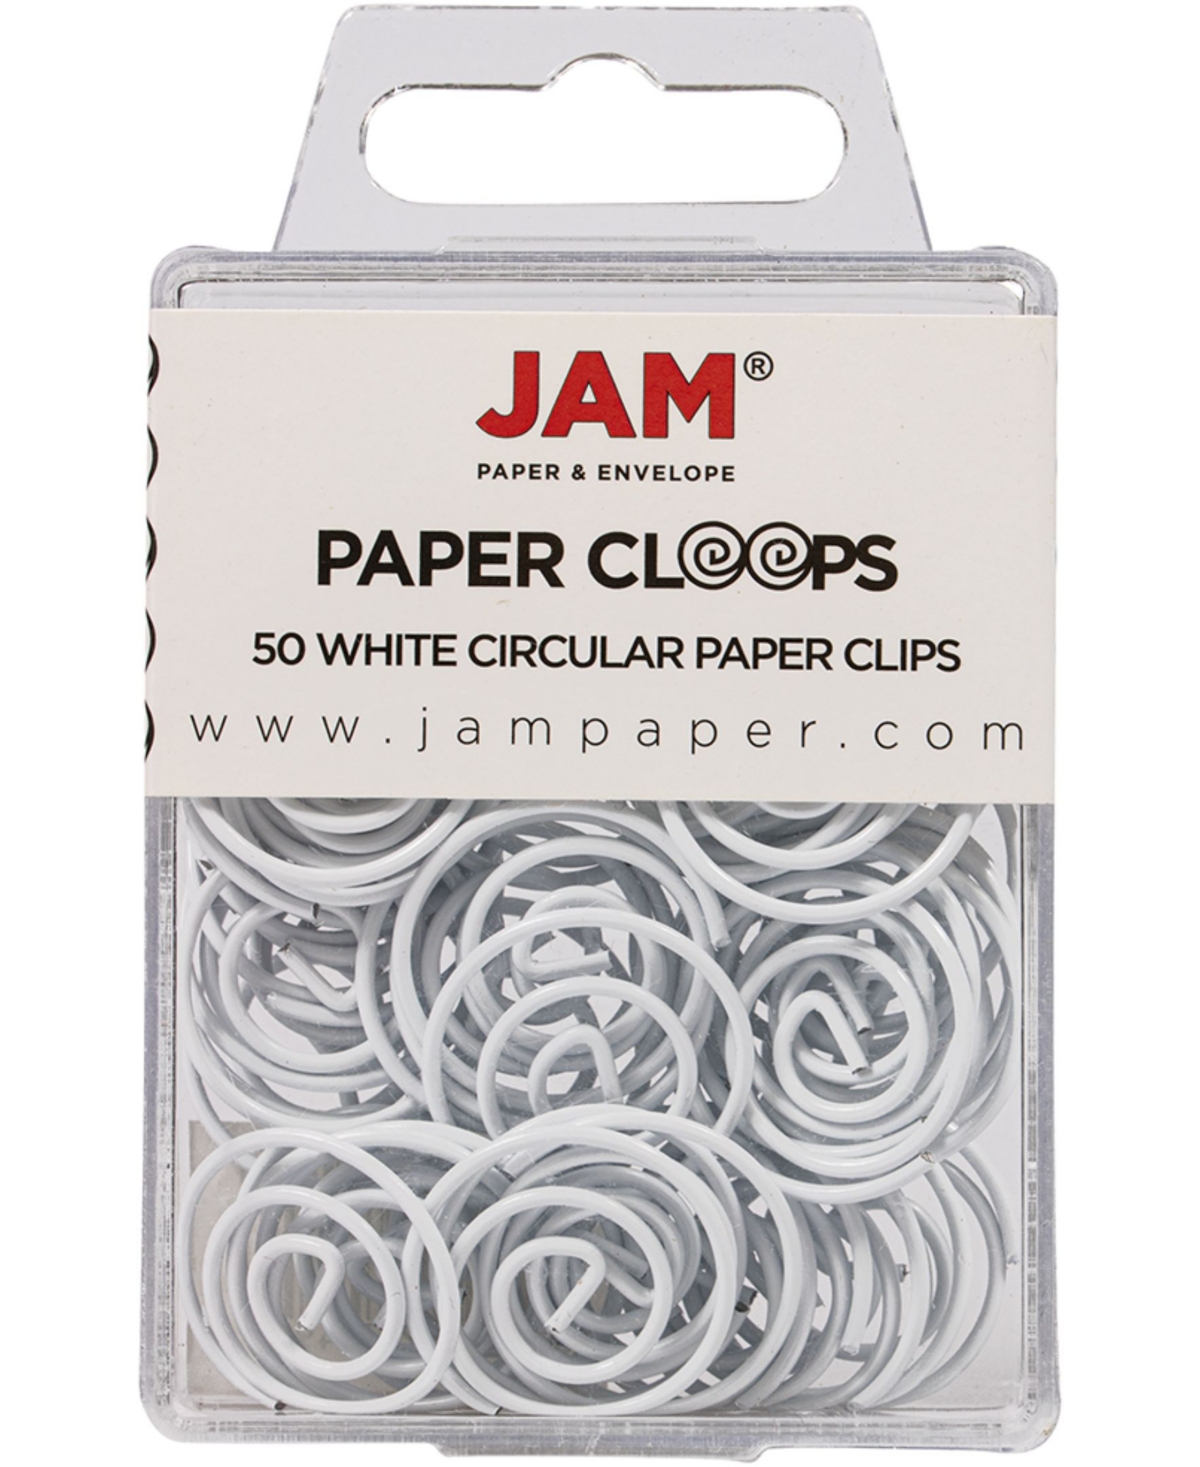 Jam Paper Circular Paper Clips In White